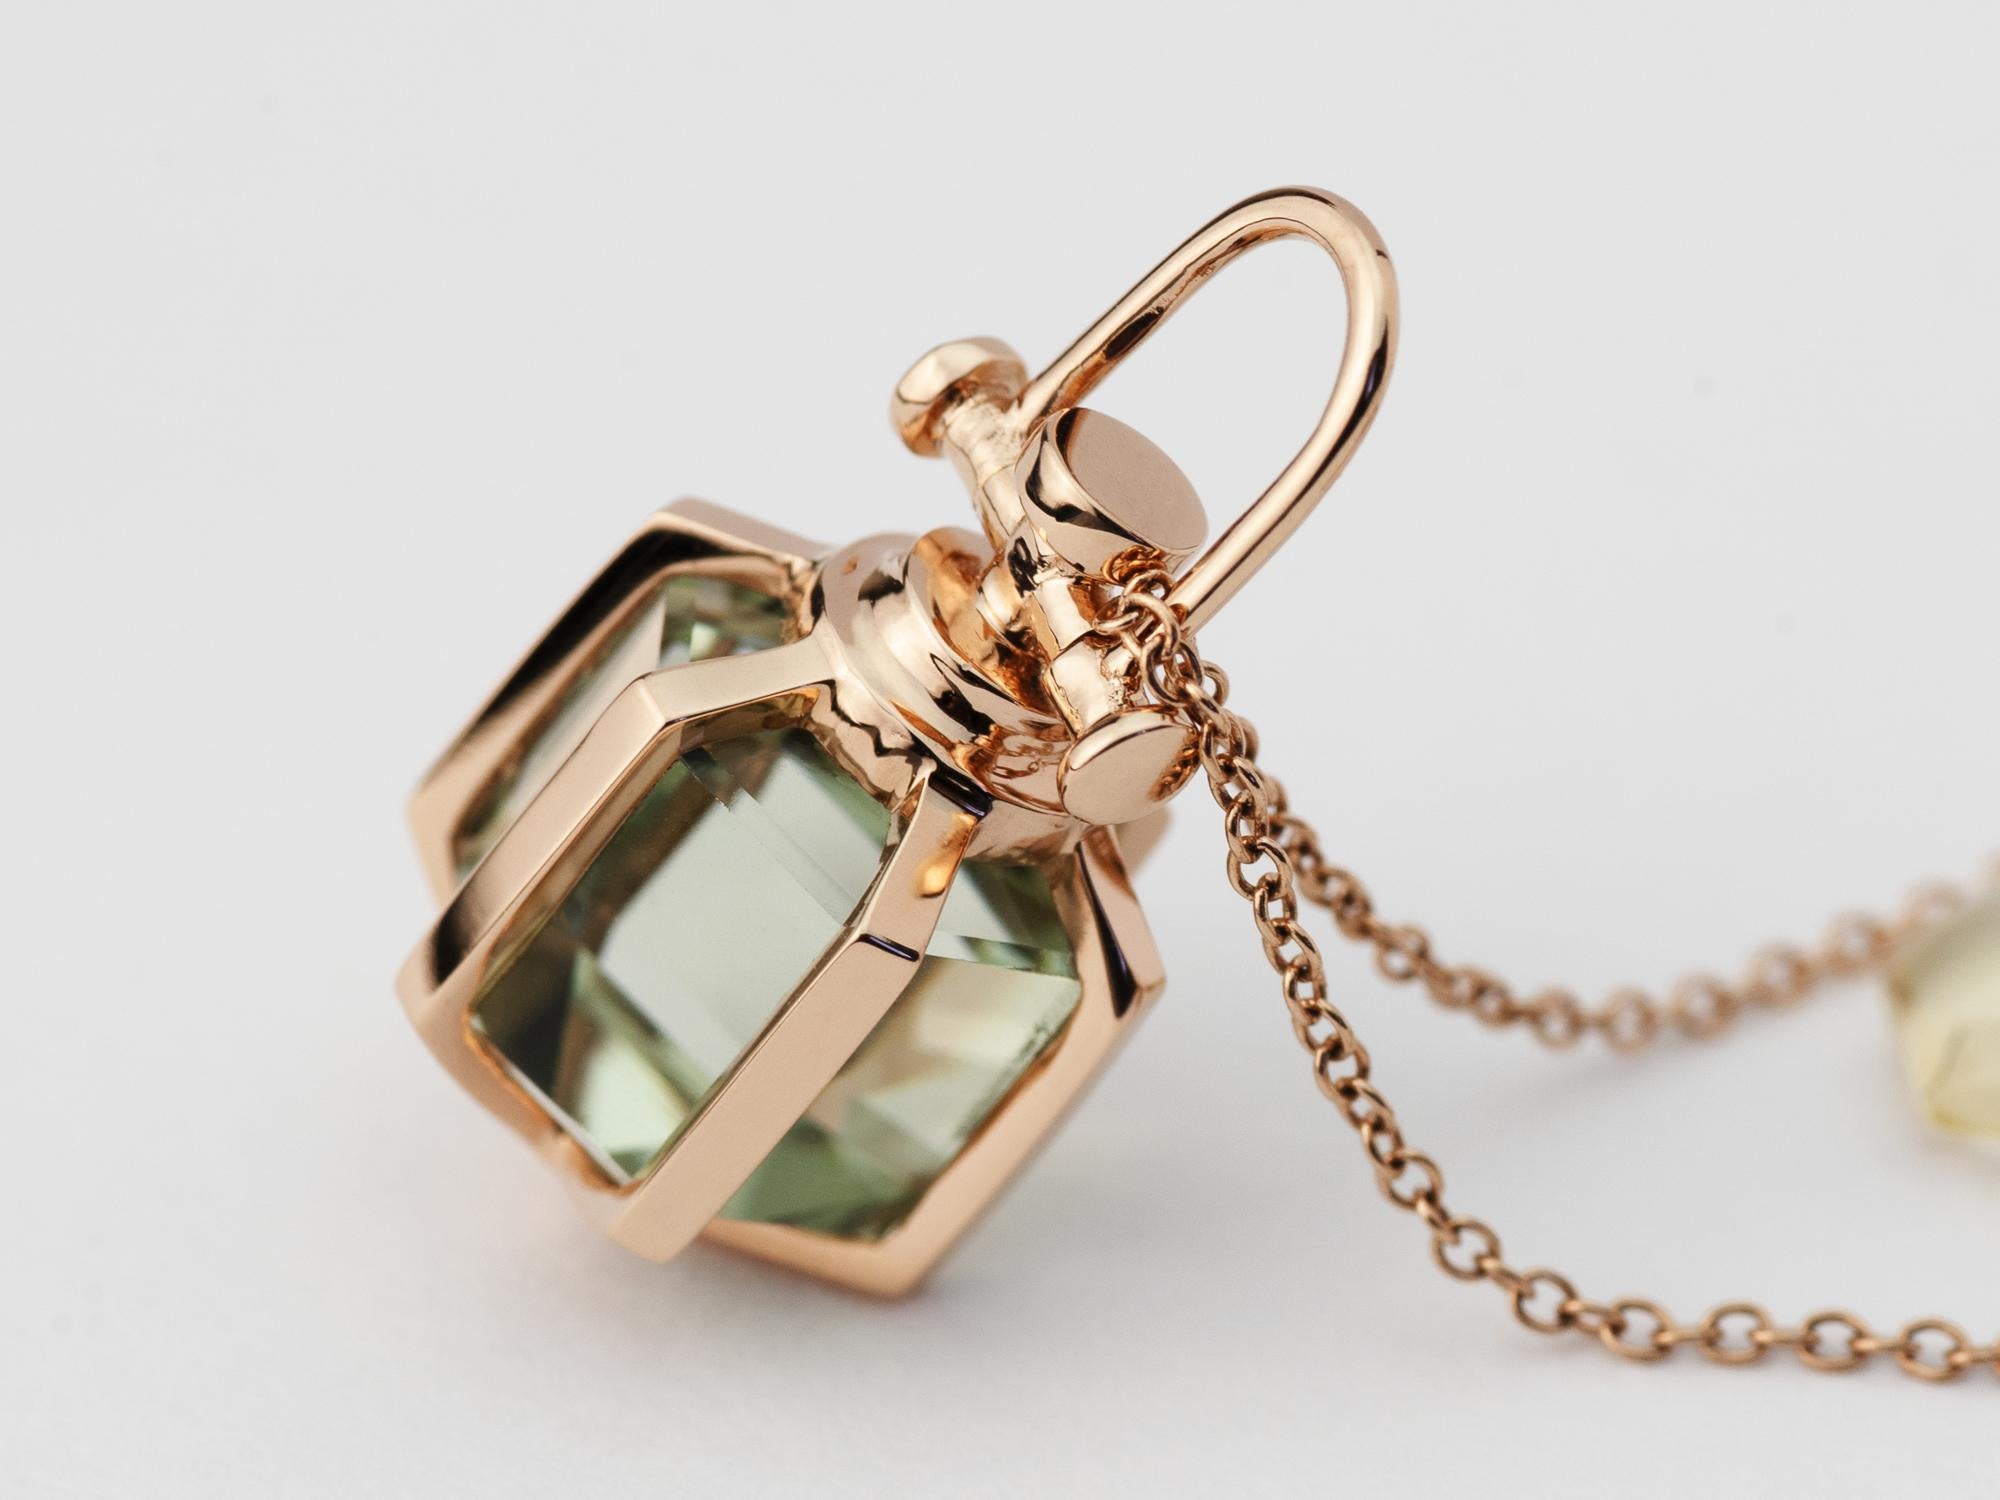 Rebecca Li designs mindfulness.
This elegant dainty necklace is from her signature Six Senses Talisman Collection.
Design inspiration: sacred geometry and ancient wisdom.

Talisman Pendant :
18k rose gold
Natural healing green amethyst
Pendant size: